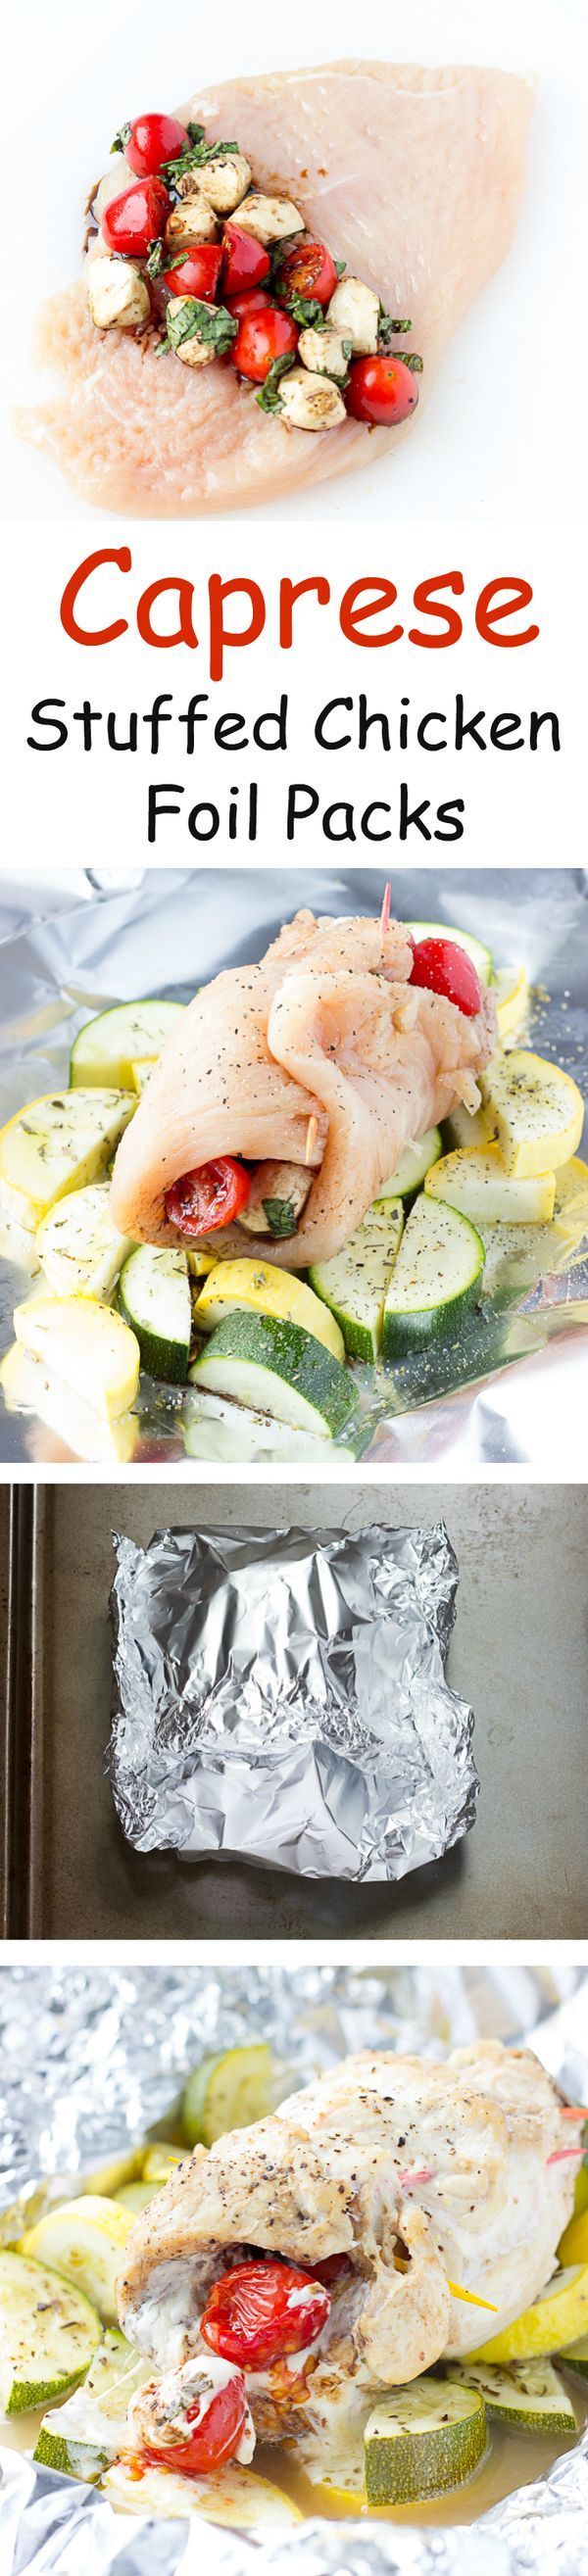 Caprese Stuffed Chicken Foil Packs – A healthy dinner recipe that can be made in an oven, on a grill, or over a campfire.  Chicken